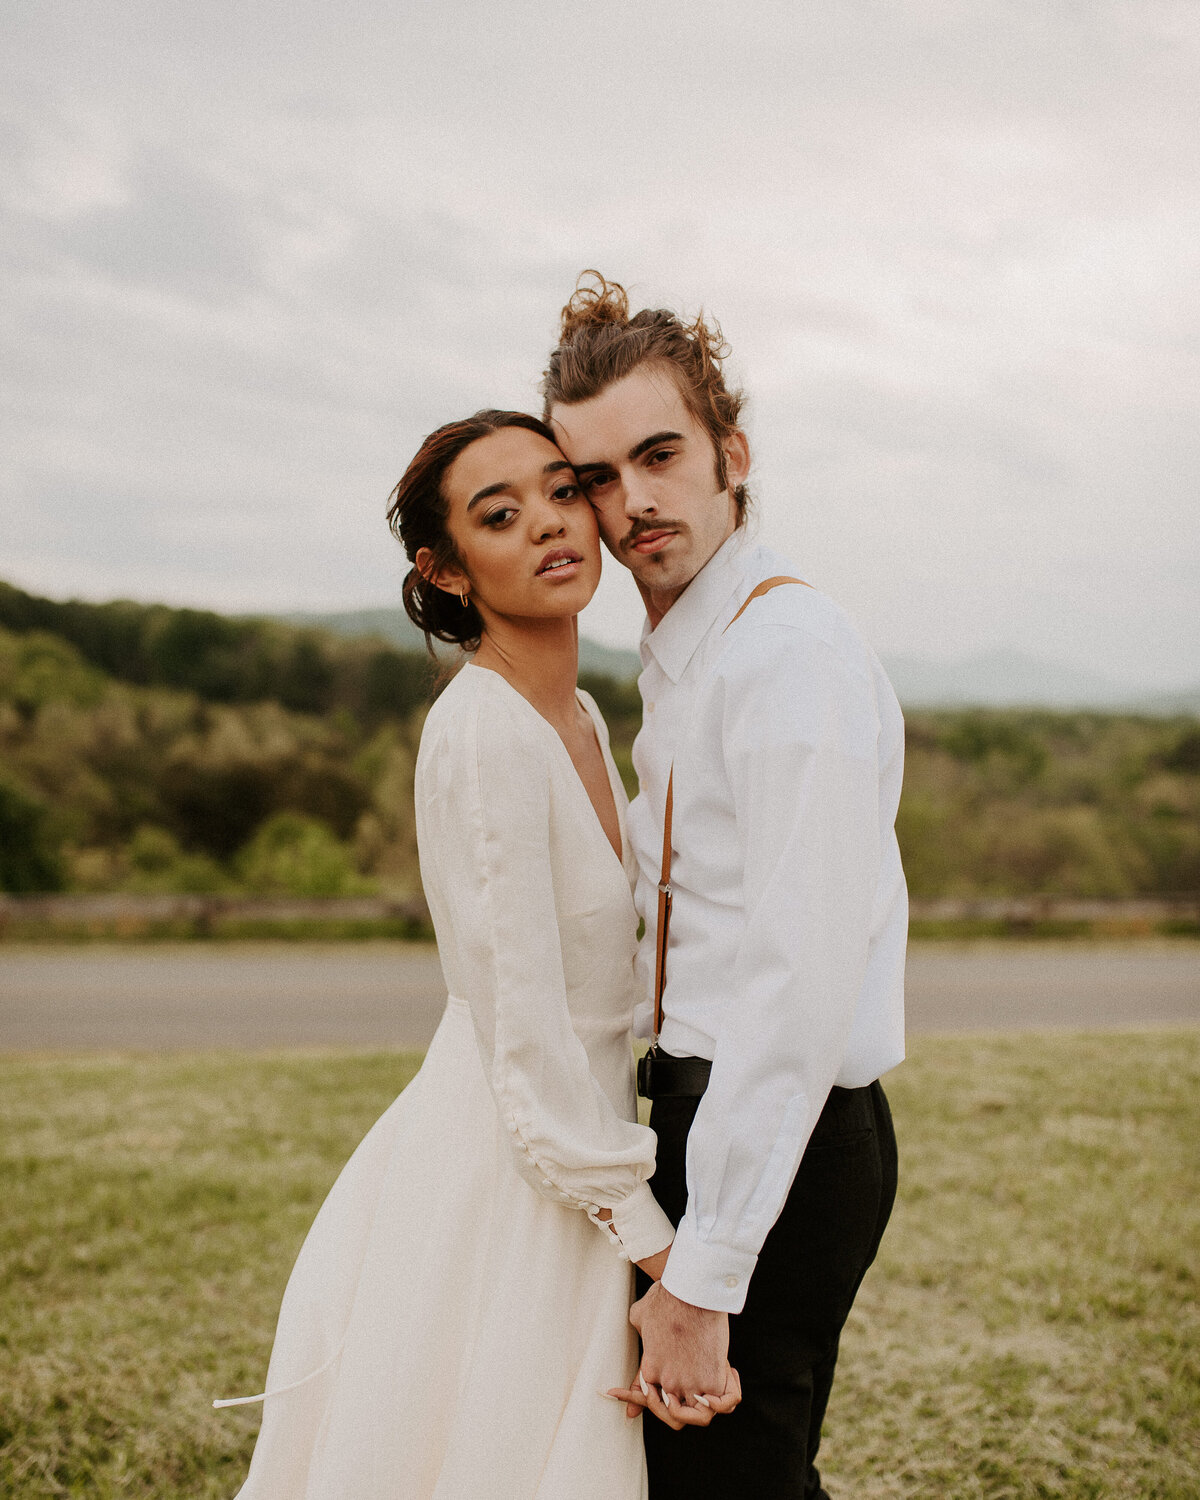 Intimate bride and groom portraits after a ceremony in the mountains of North Carolina. Bride and groom portrait inspiration during golden hour.